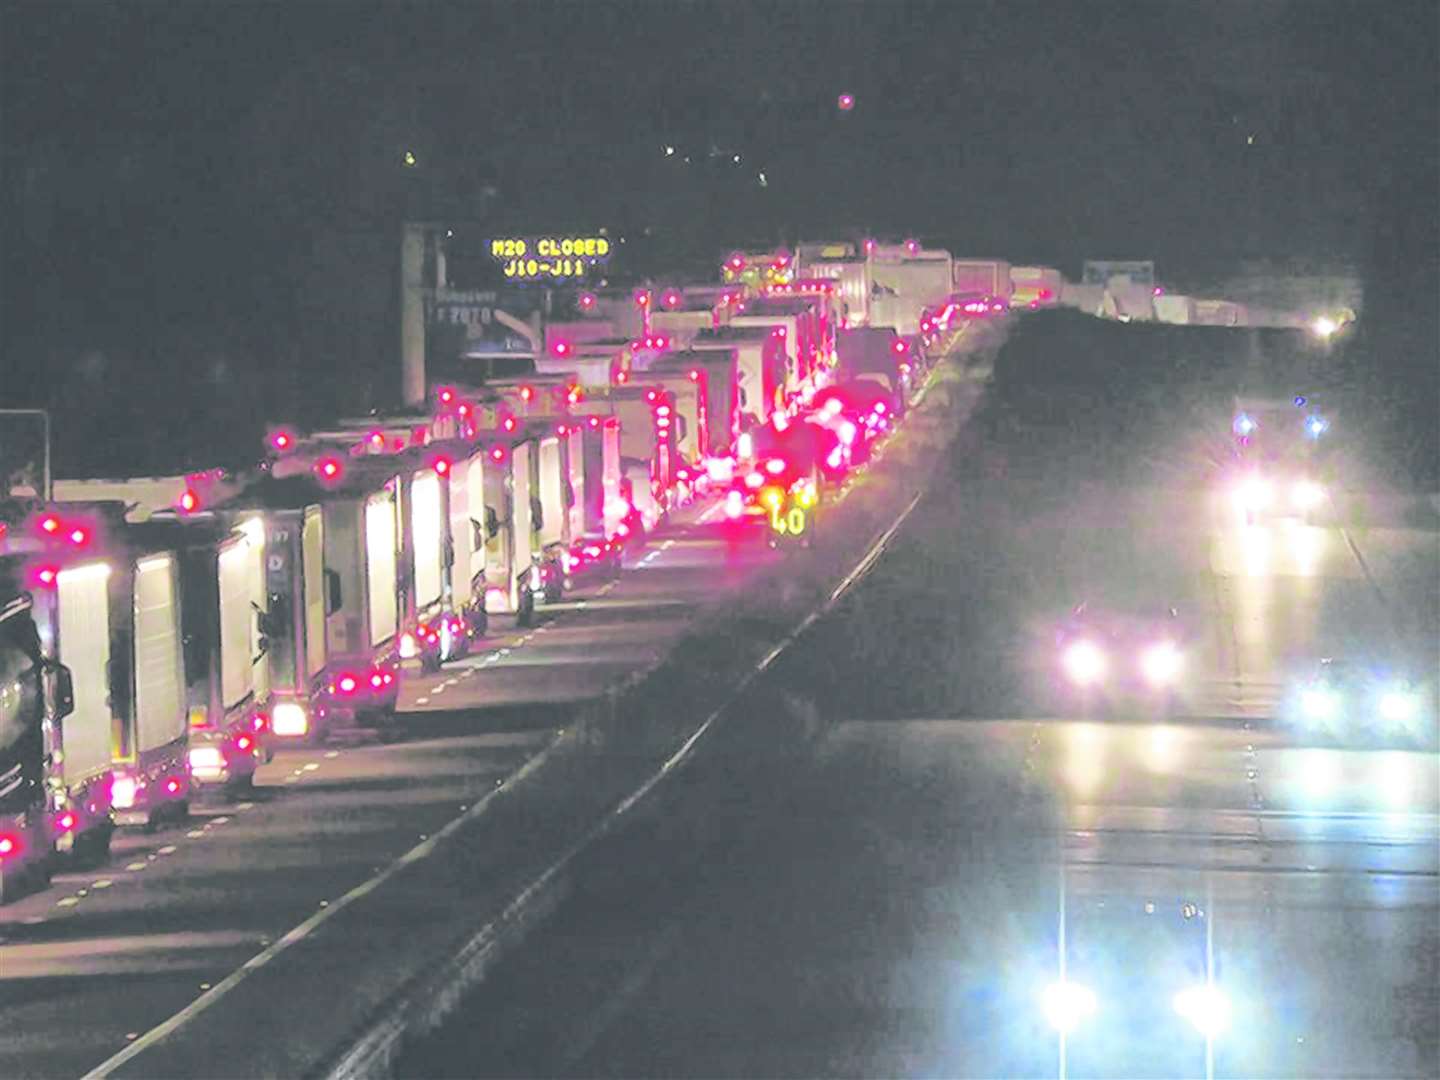 There were long queues along the M20 as a result of the incident